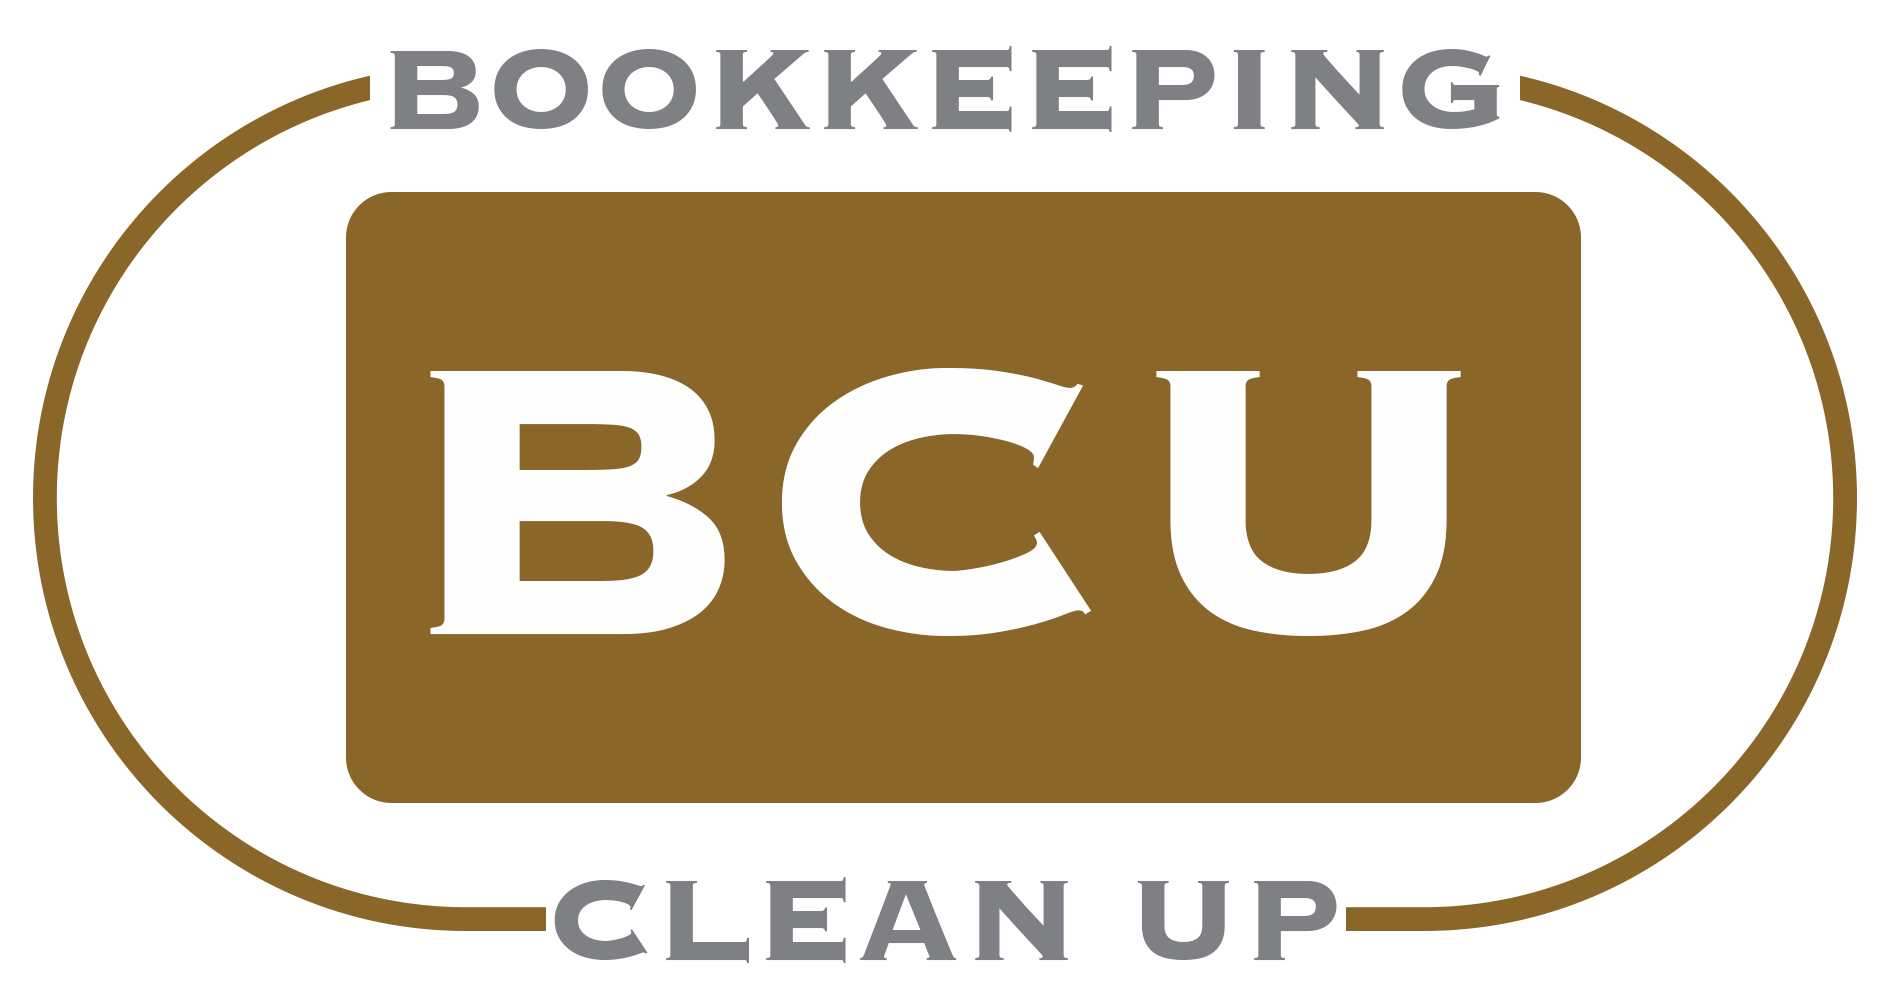 Bookkeeping Clean Up